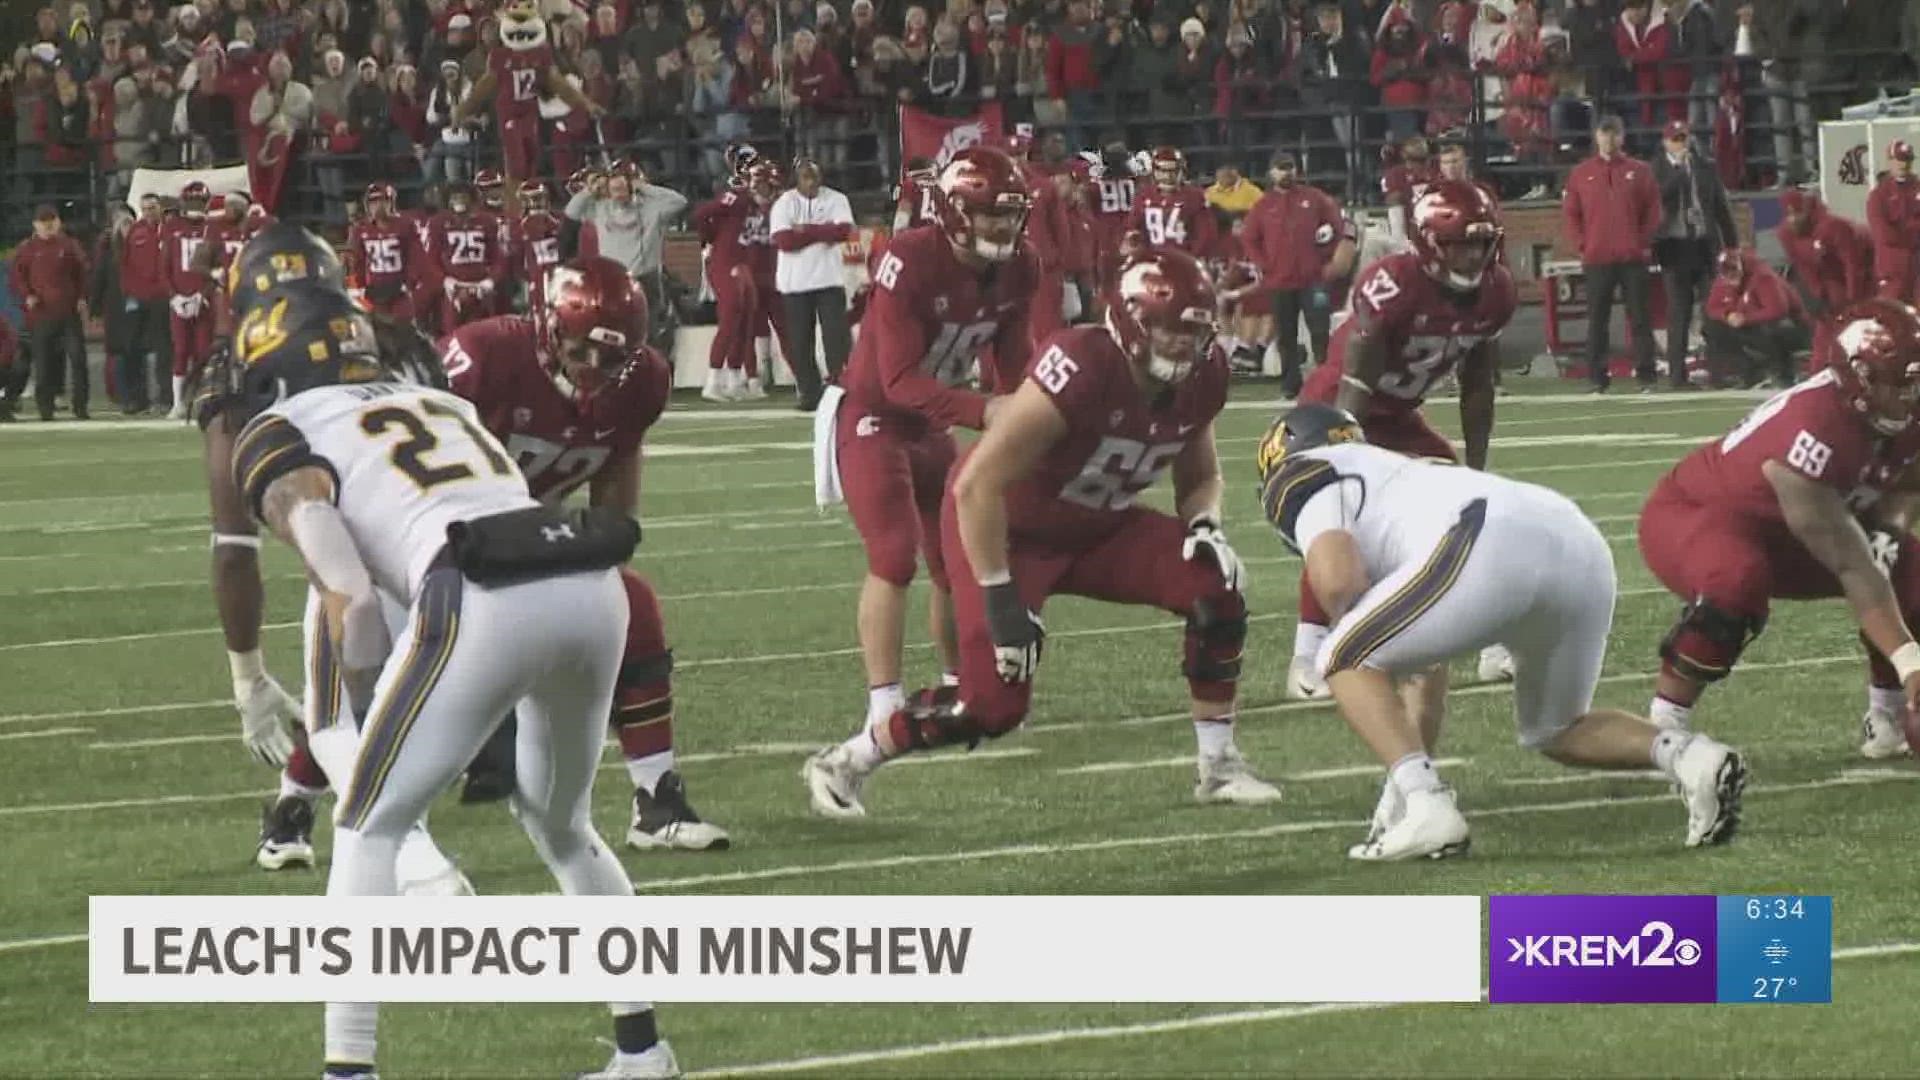 Minshew is now in his fourth year in the NFL. Gardner's father, Flint, is thankful for what Leach did for his son while he was at WSU.